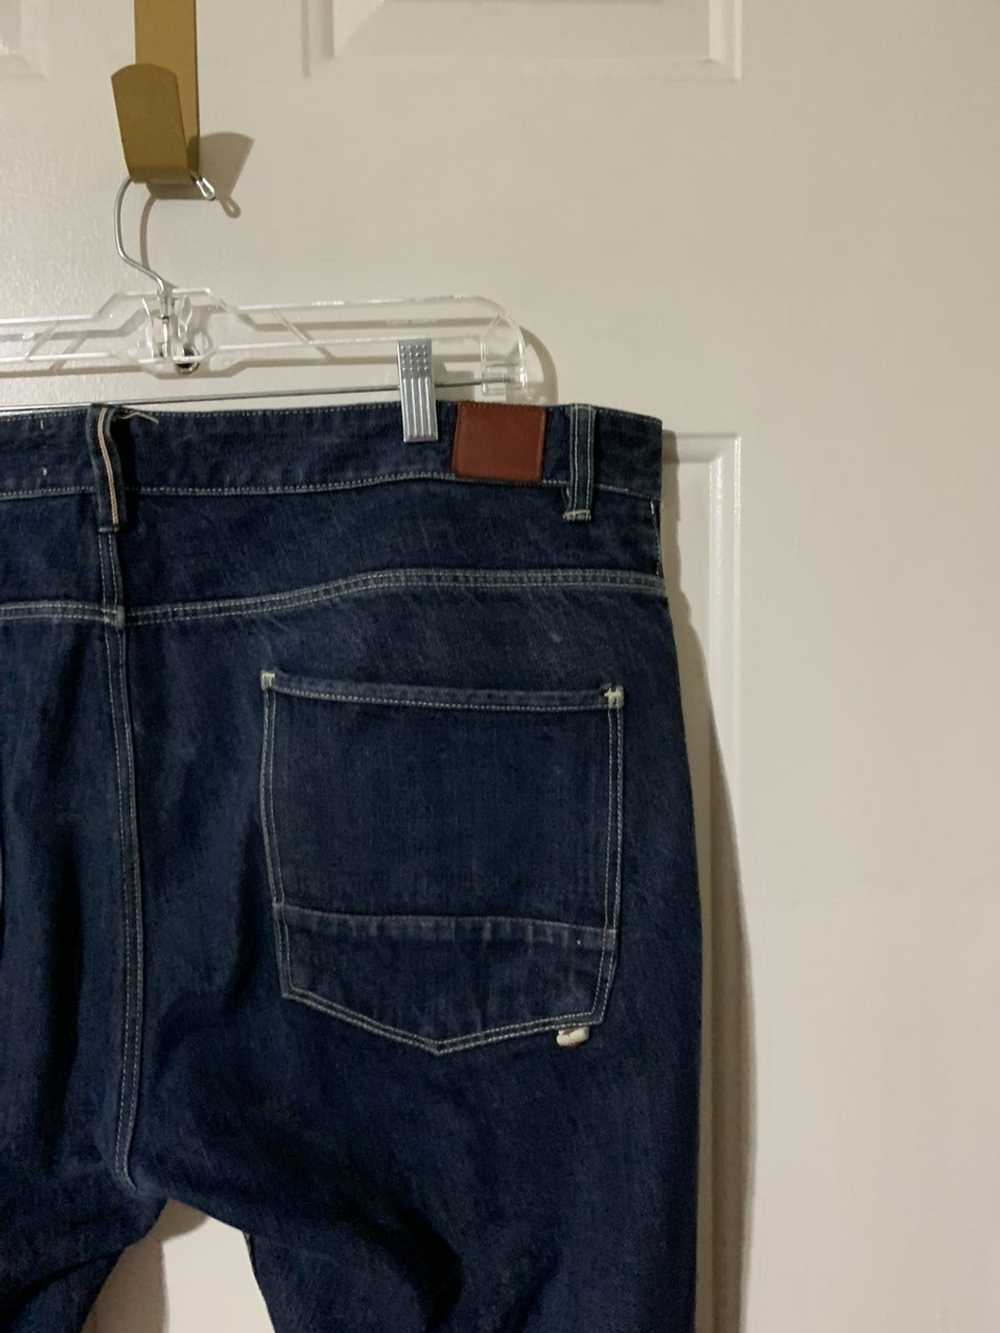 Asos × Japanese Brand Button Fly Selvedge jeans - image 8